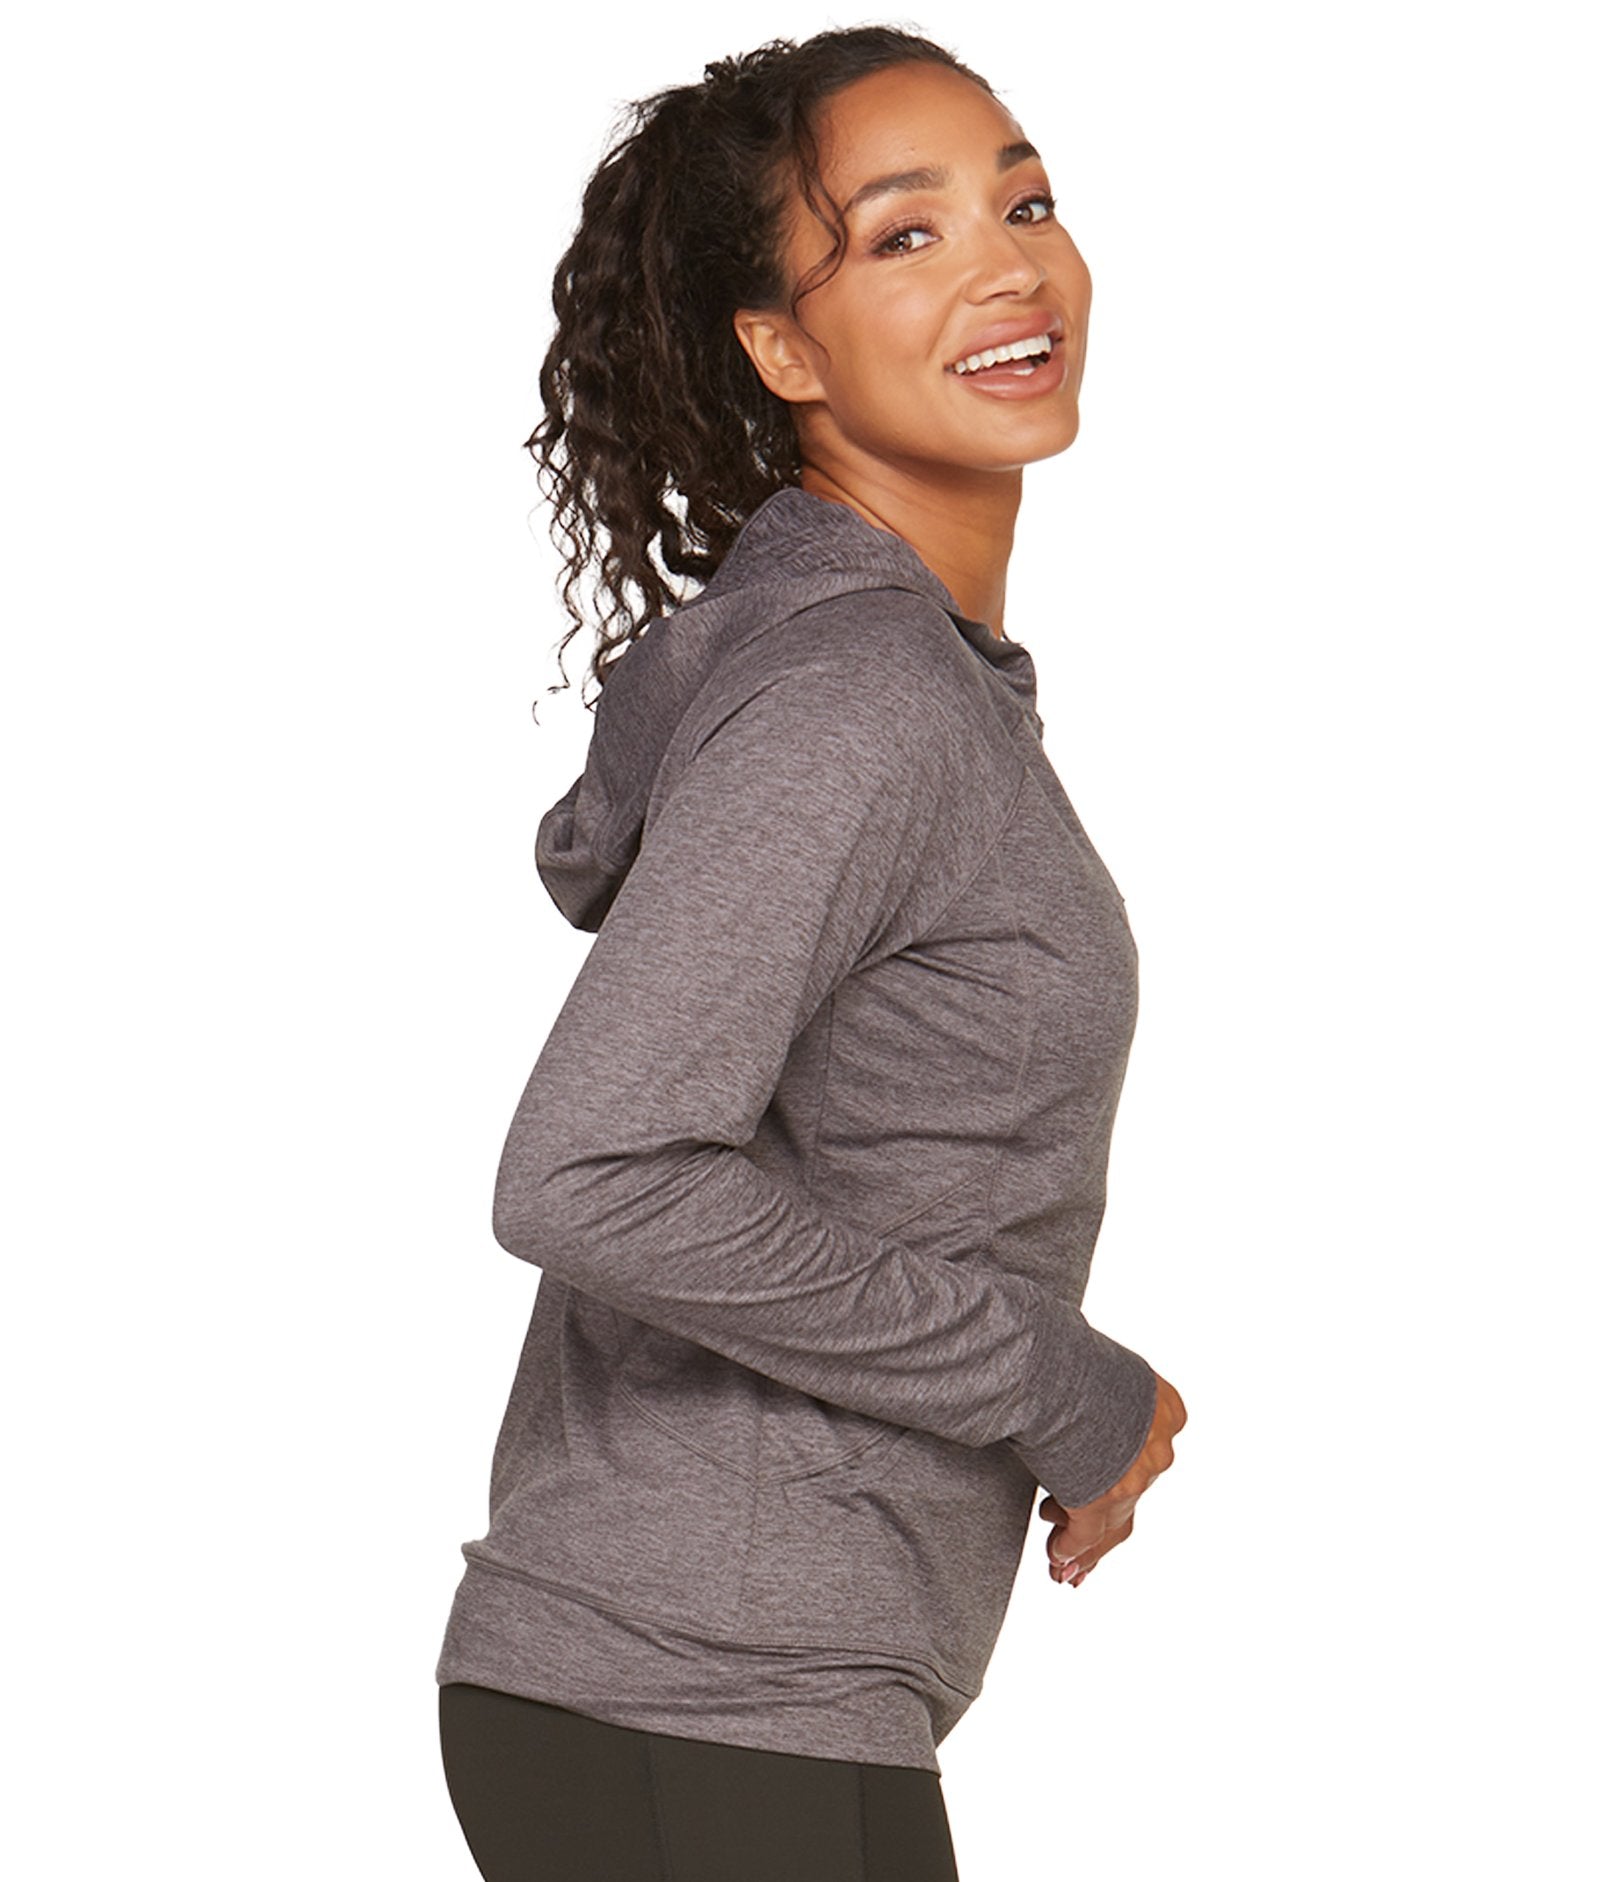 Women's Heather Charcoal Aflame Recycled Full Zip Jacket